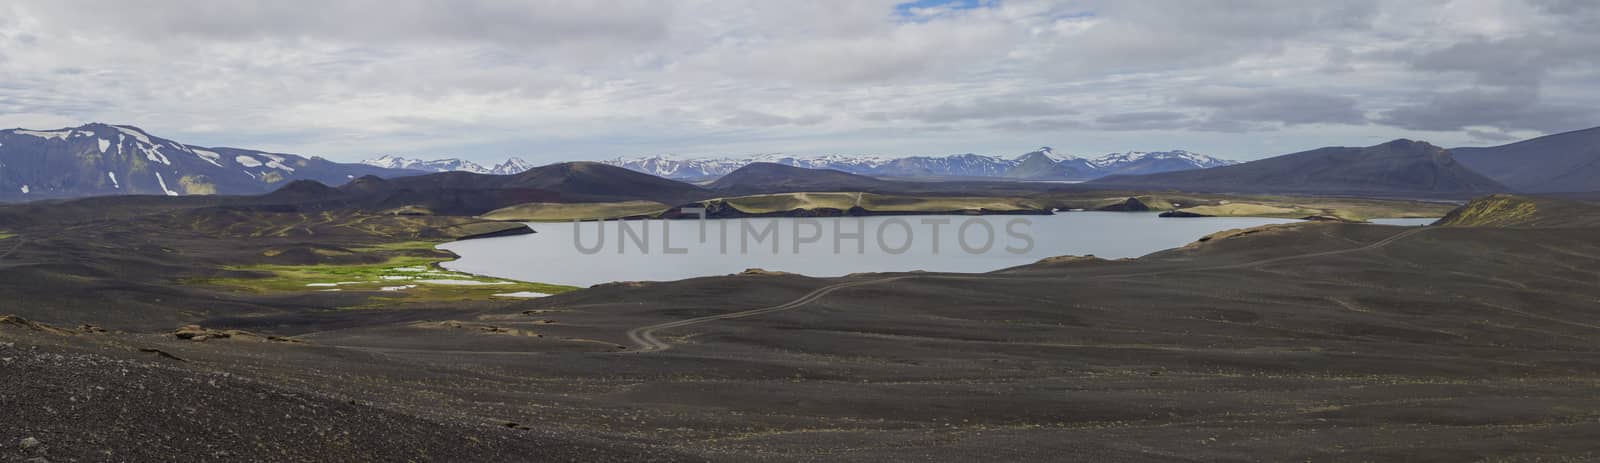 Colorful wide panorama, panoramic view on landscape with volcanic snow covered mountains and crater lakes and dirty mountain roads in Veidivotn area, central Iceland highlands in the middle of black lava desert by Henkeova